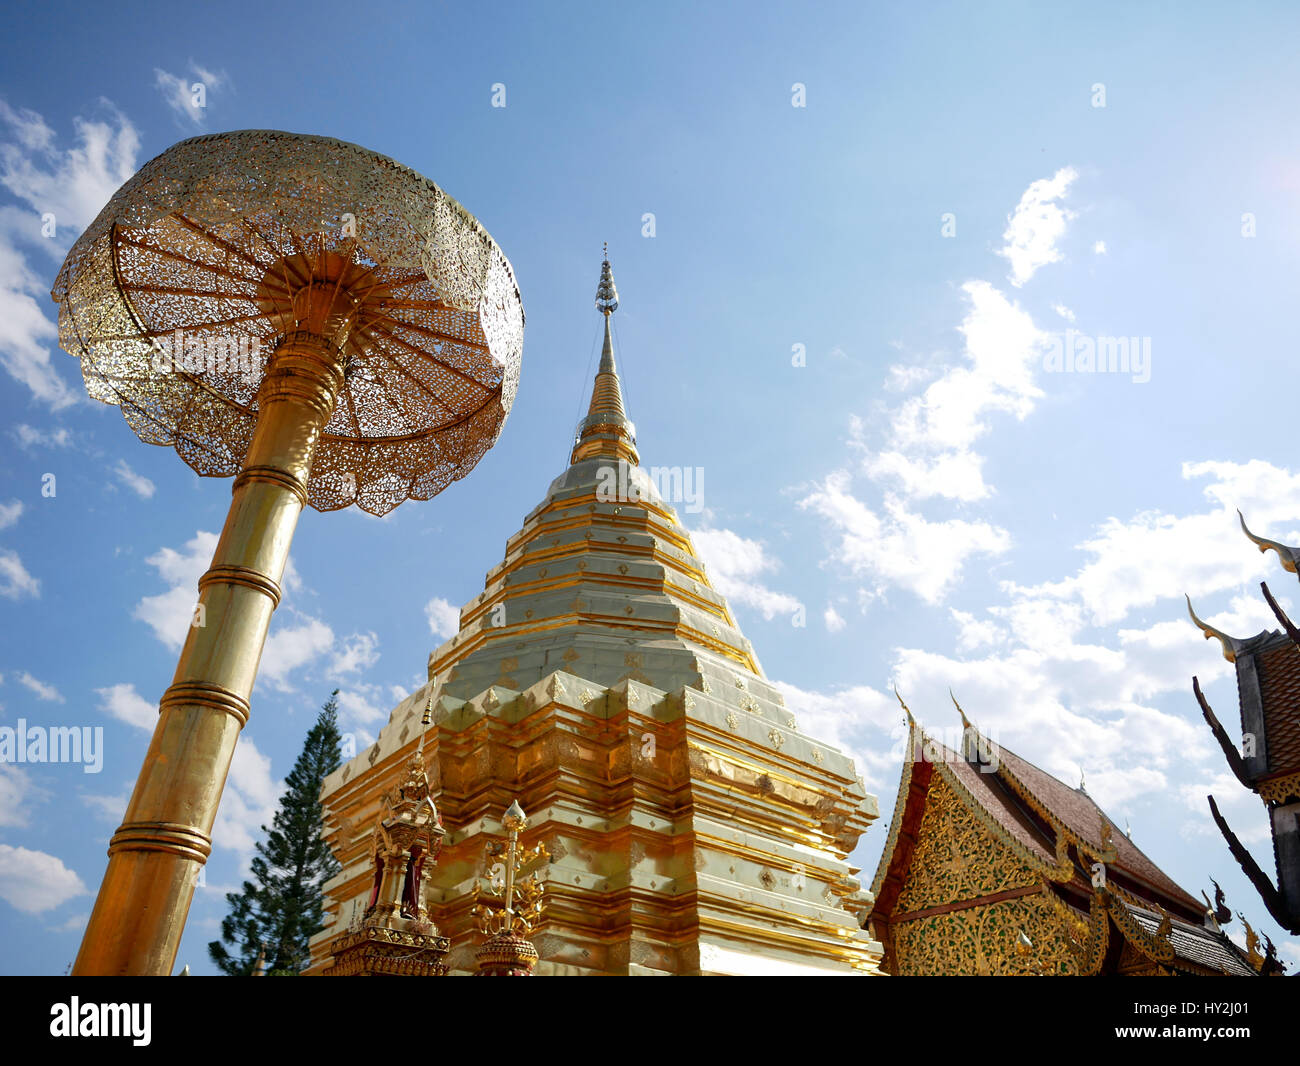 Thai pagoda at Wat Phra That Doi Kham (Temple of the Golden Mountain) in Chiang Mai, Thailand Stock Photo